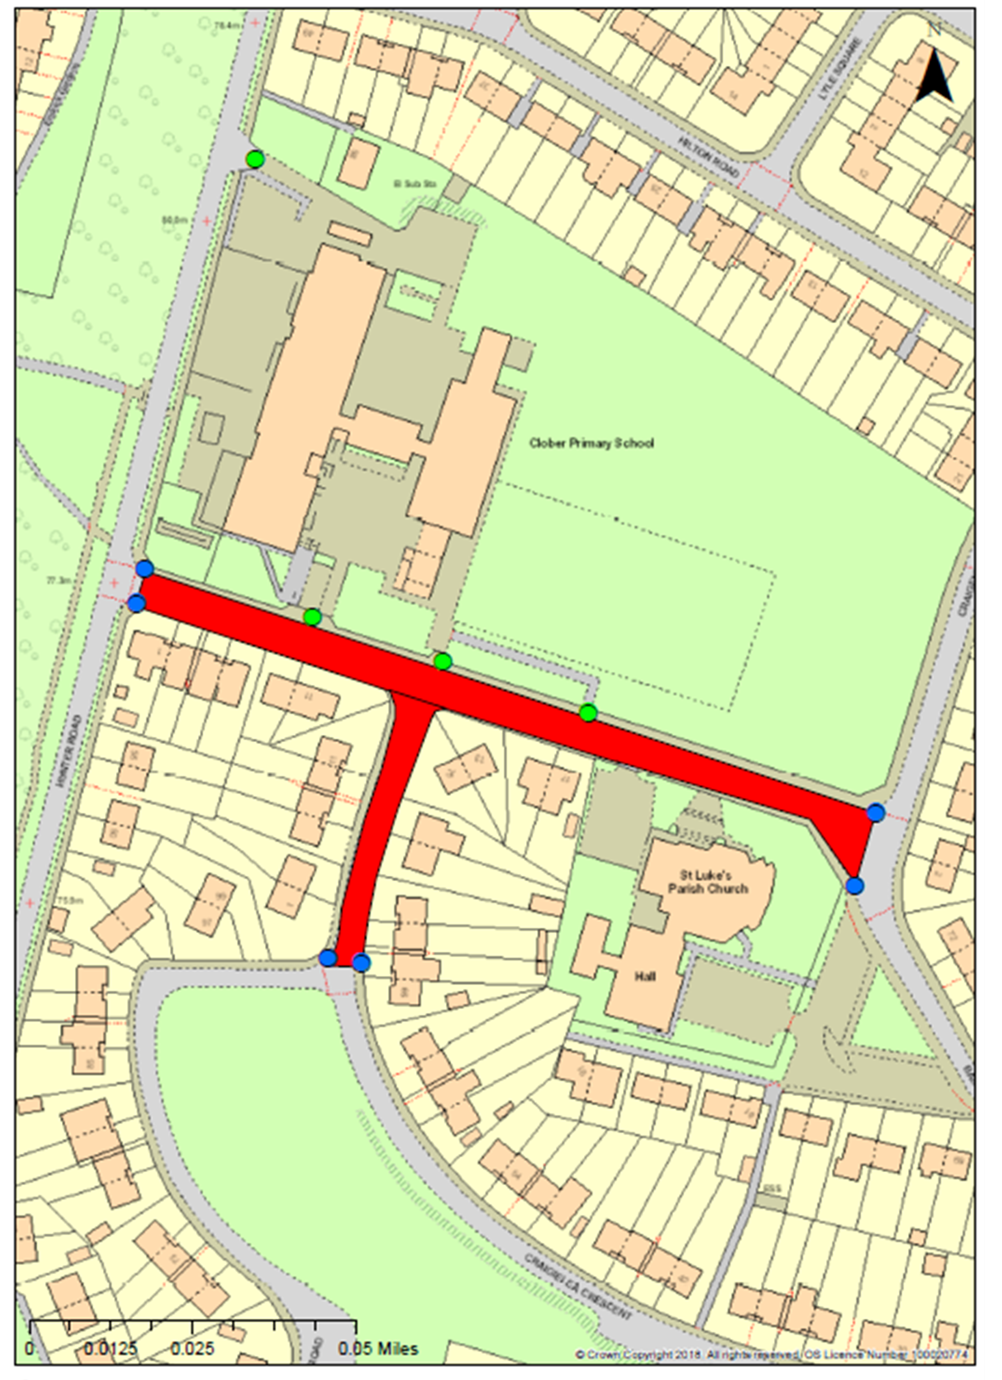 Map of area surrounding Clober Primary school in Milngavie highlighting that Kirk Street and Craigielea Crescent (from its junction with Kirk Street to its junction with Ashburn Road) will be closed during school hours as part of the pilot. The map also shows potential sign locations.